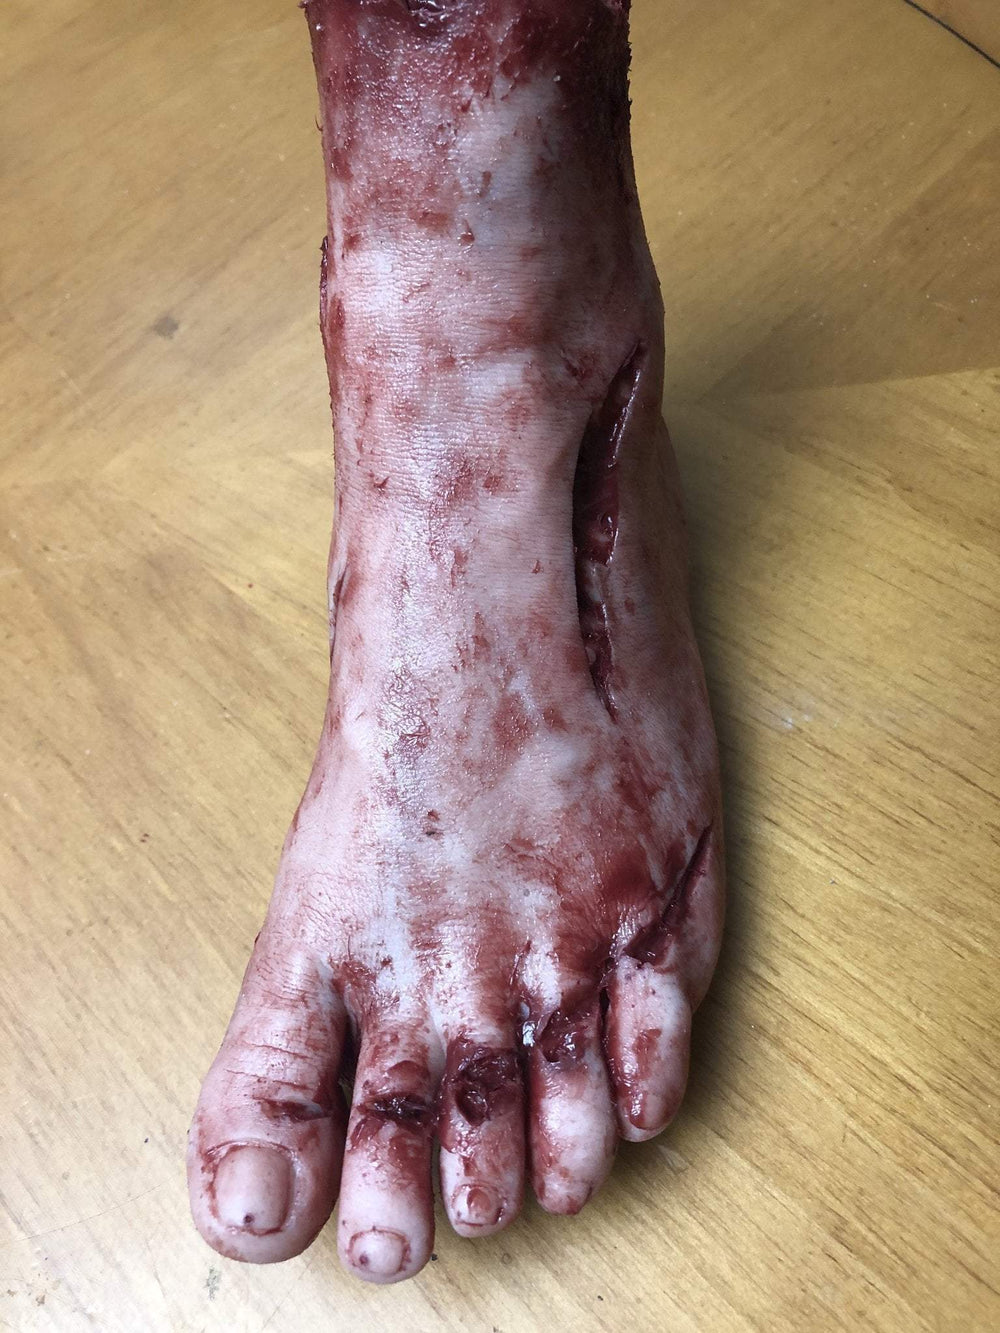 "Silicone Severed Left Female Foot" Body Parts Halloween Prop